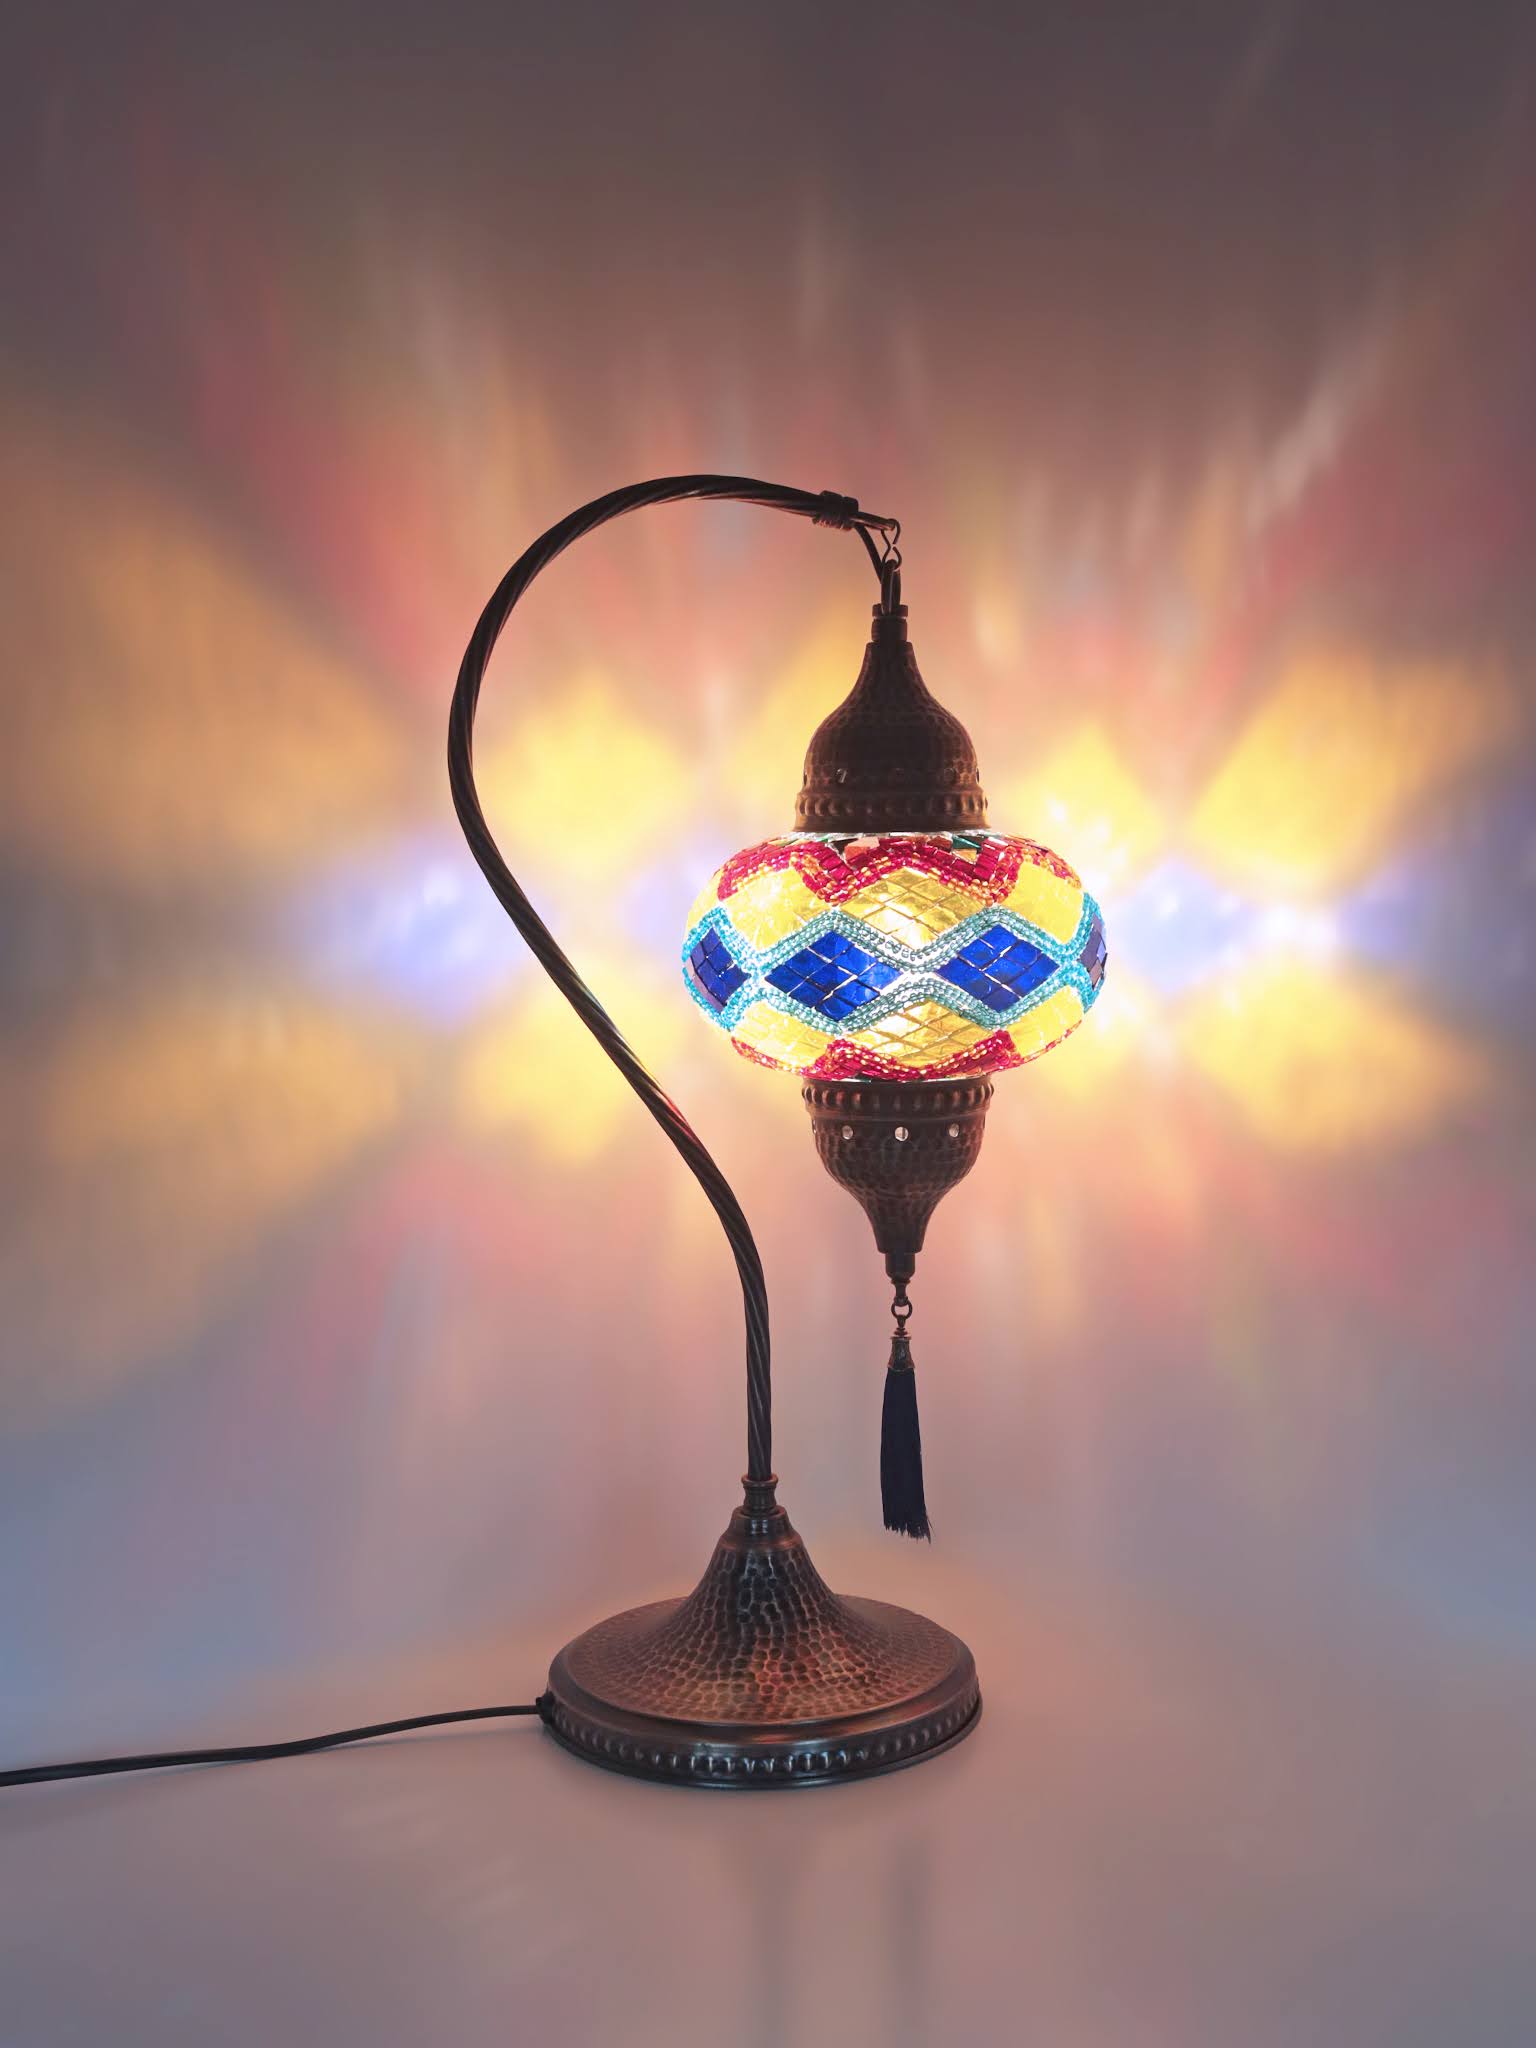 Turkish Mosaic Table Lamp Colorfully Lampshade Bedside Desk Light